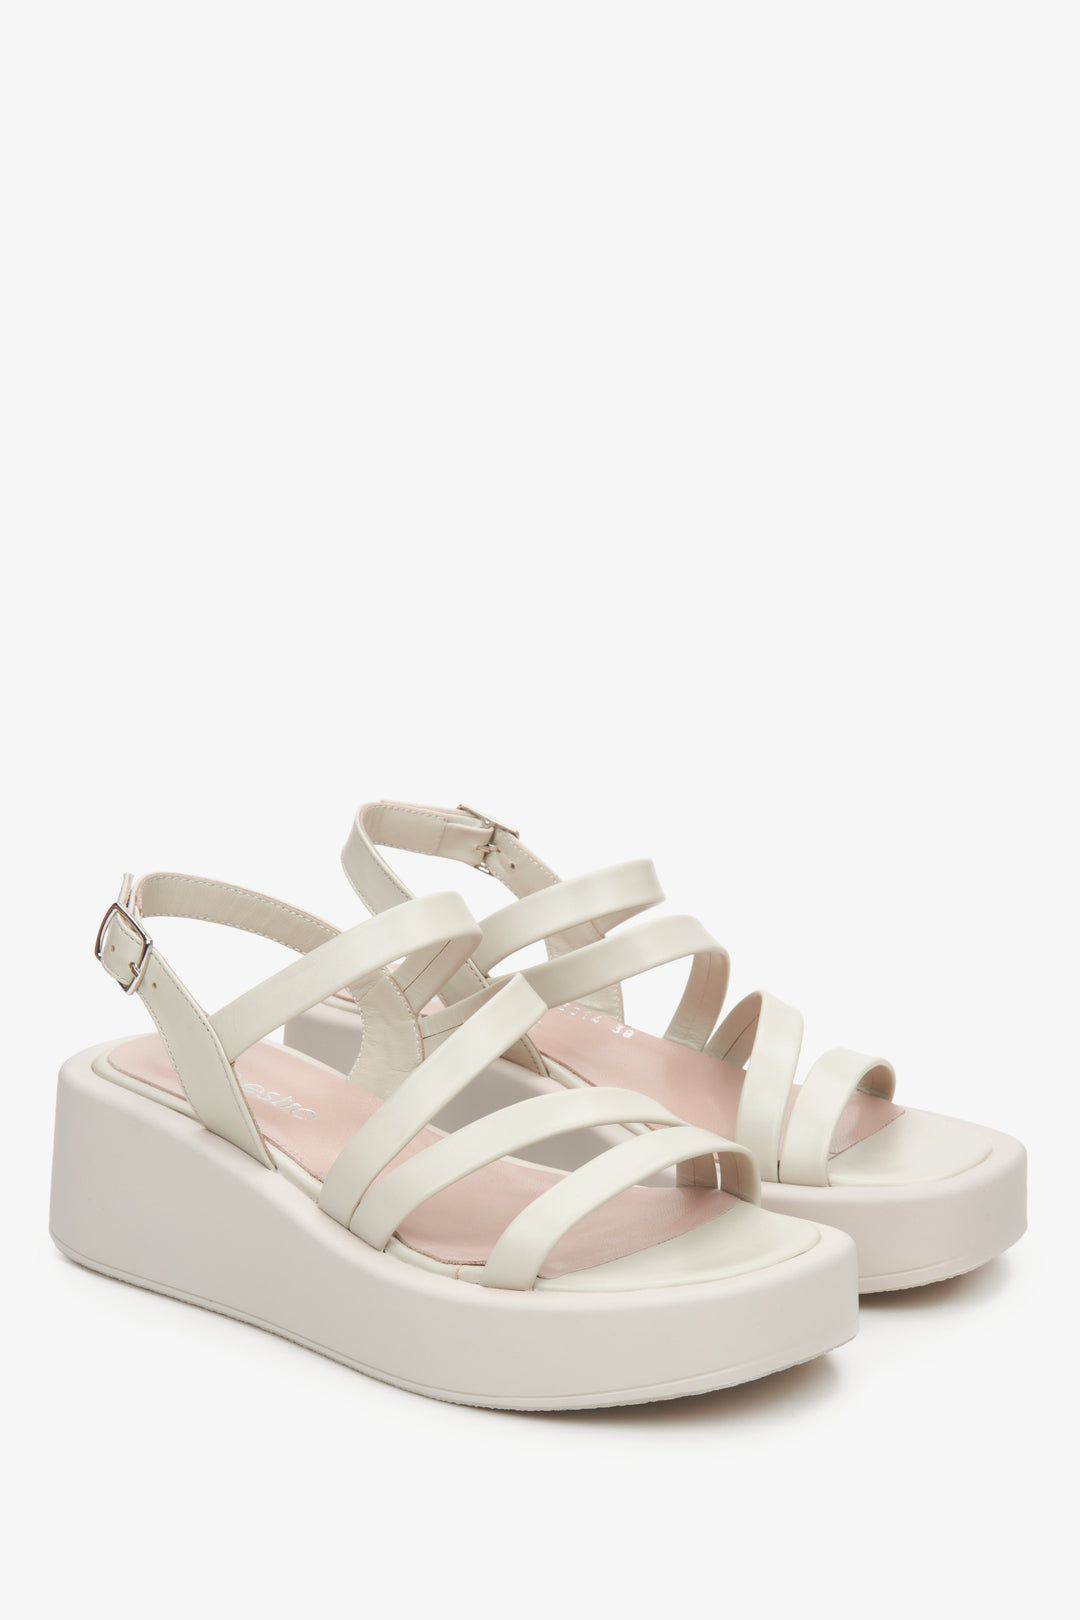 Women's leather wedge sandals by Estro in light beige colour.